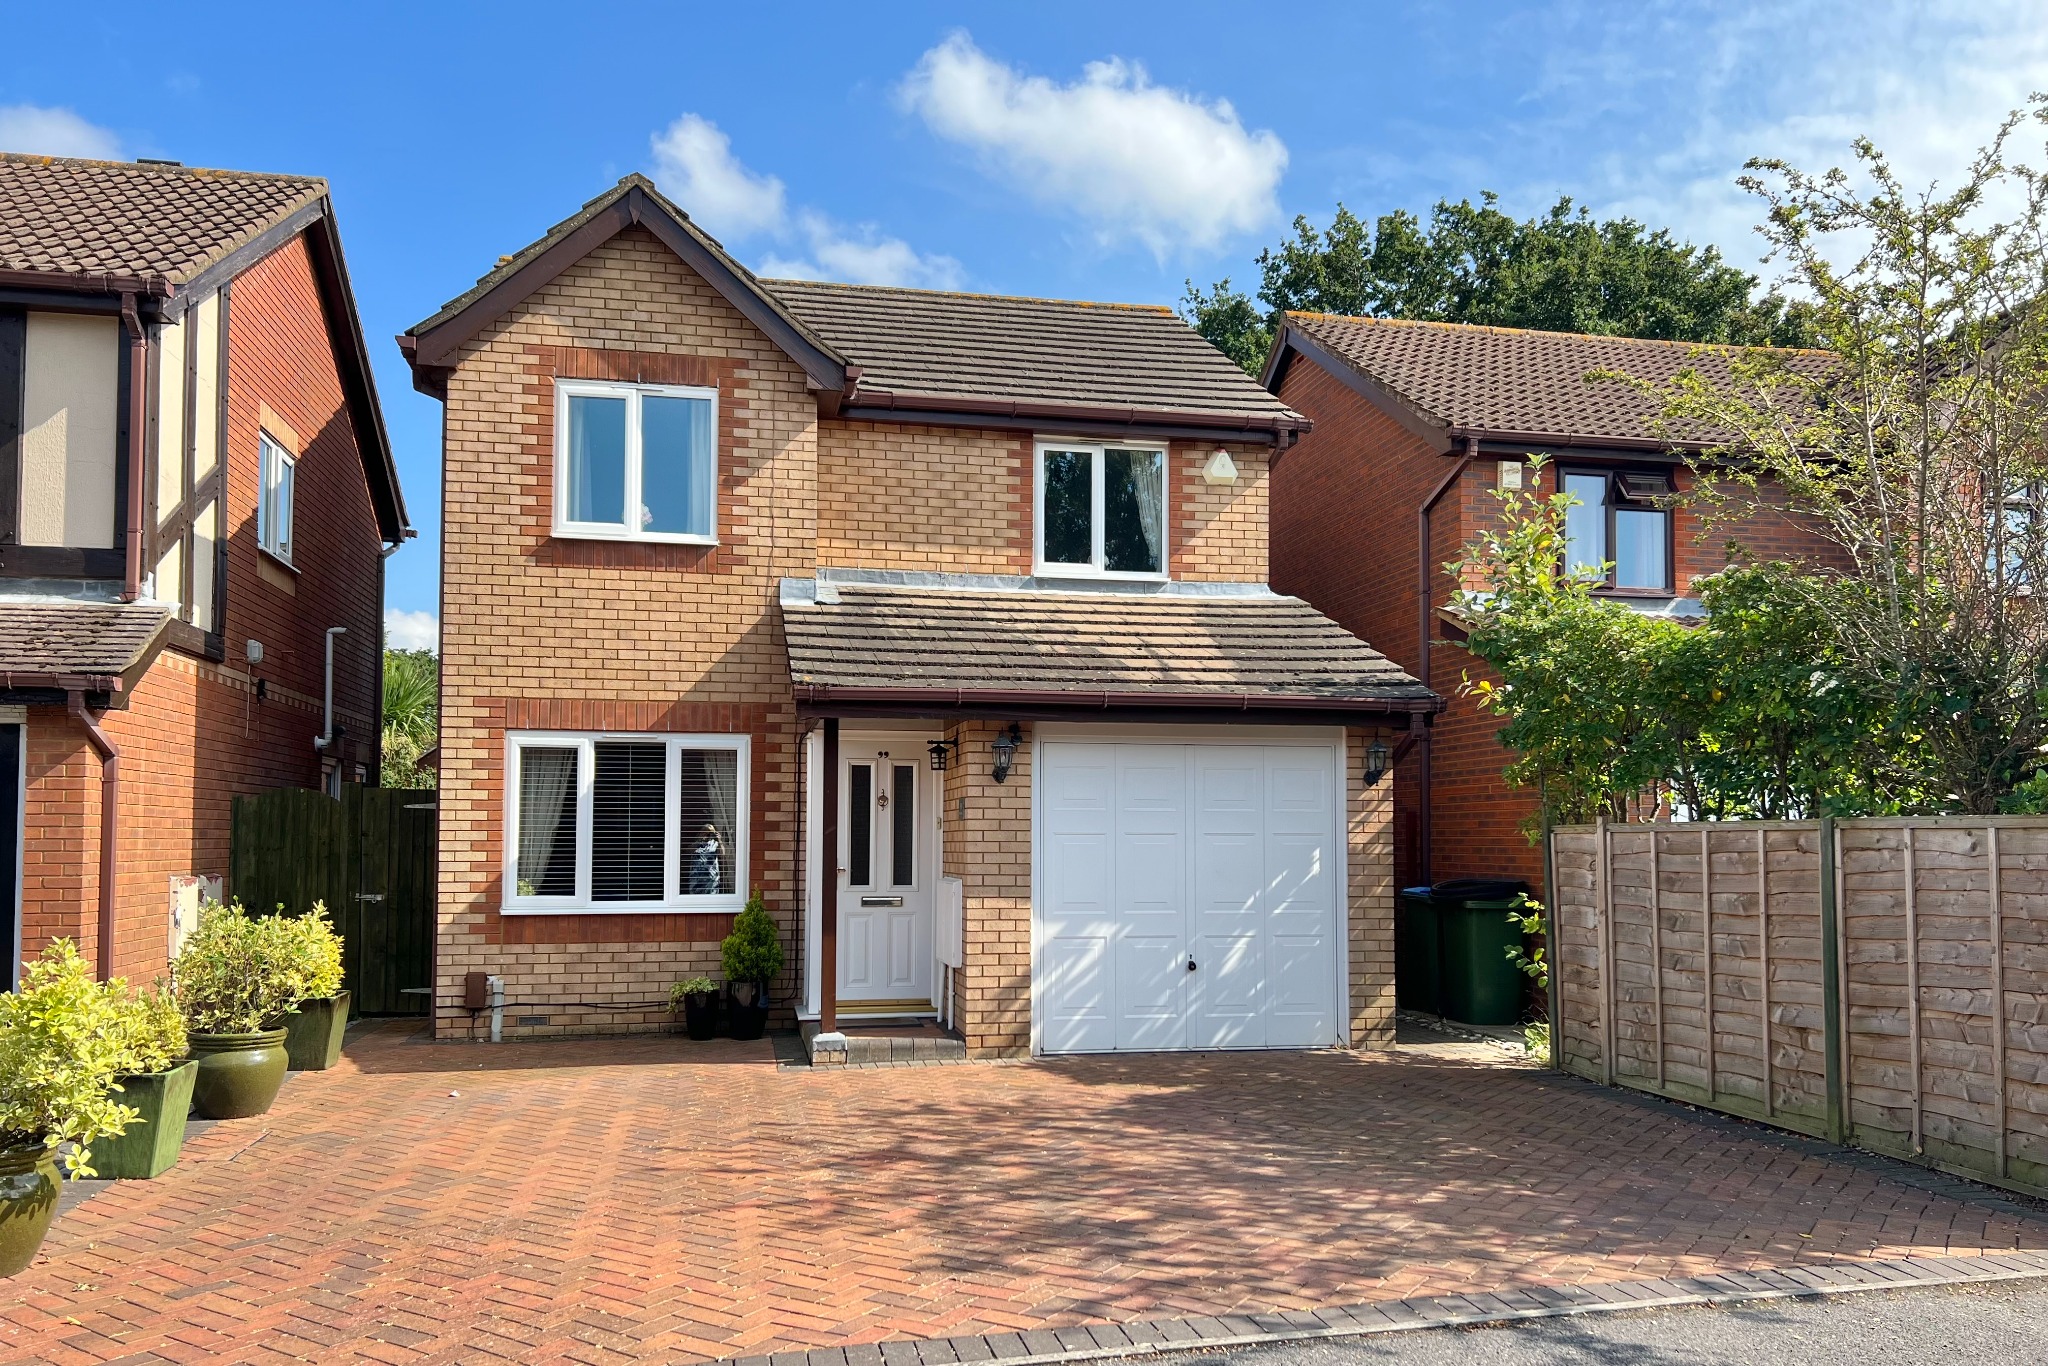 3 bed detached house for sale in Titchfield Common, Fareham  - Property Image 1